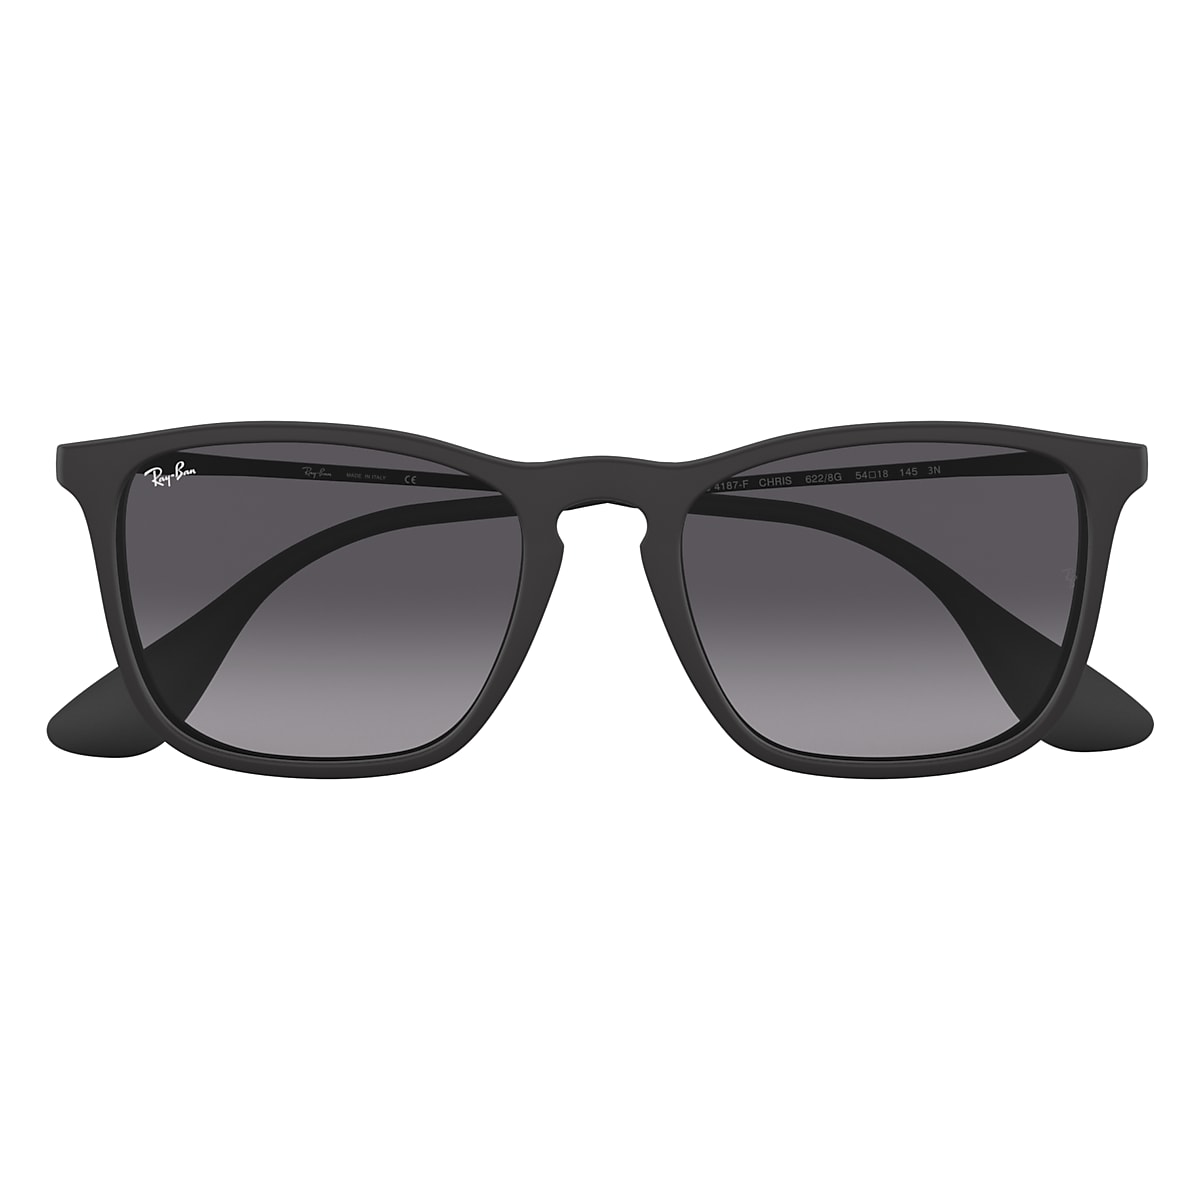 CHRIS Sunglasses in Black and Grey - RB4187F | Ray-Ban® US